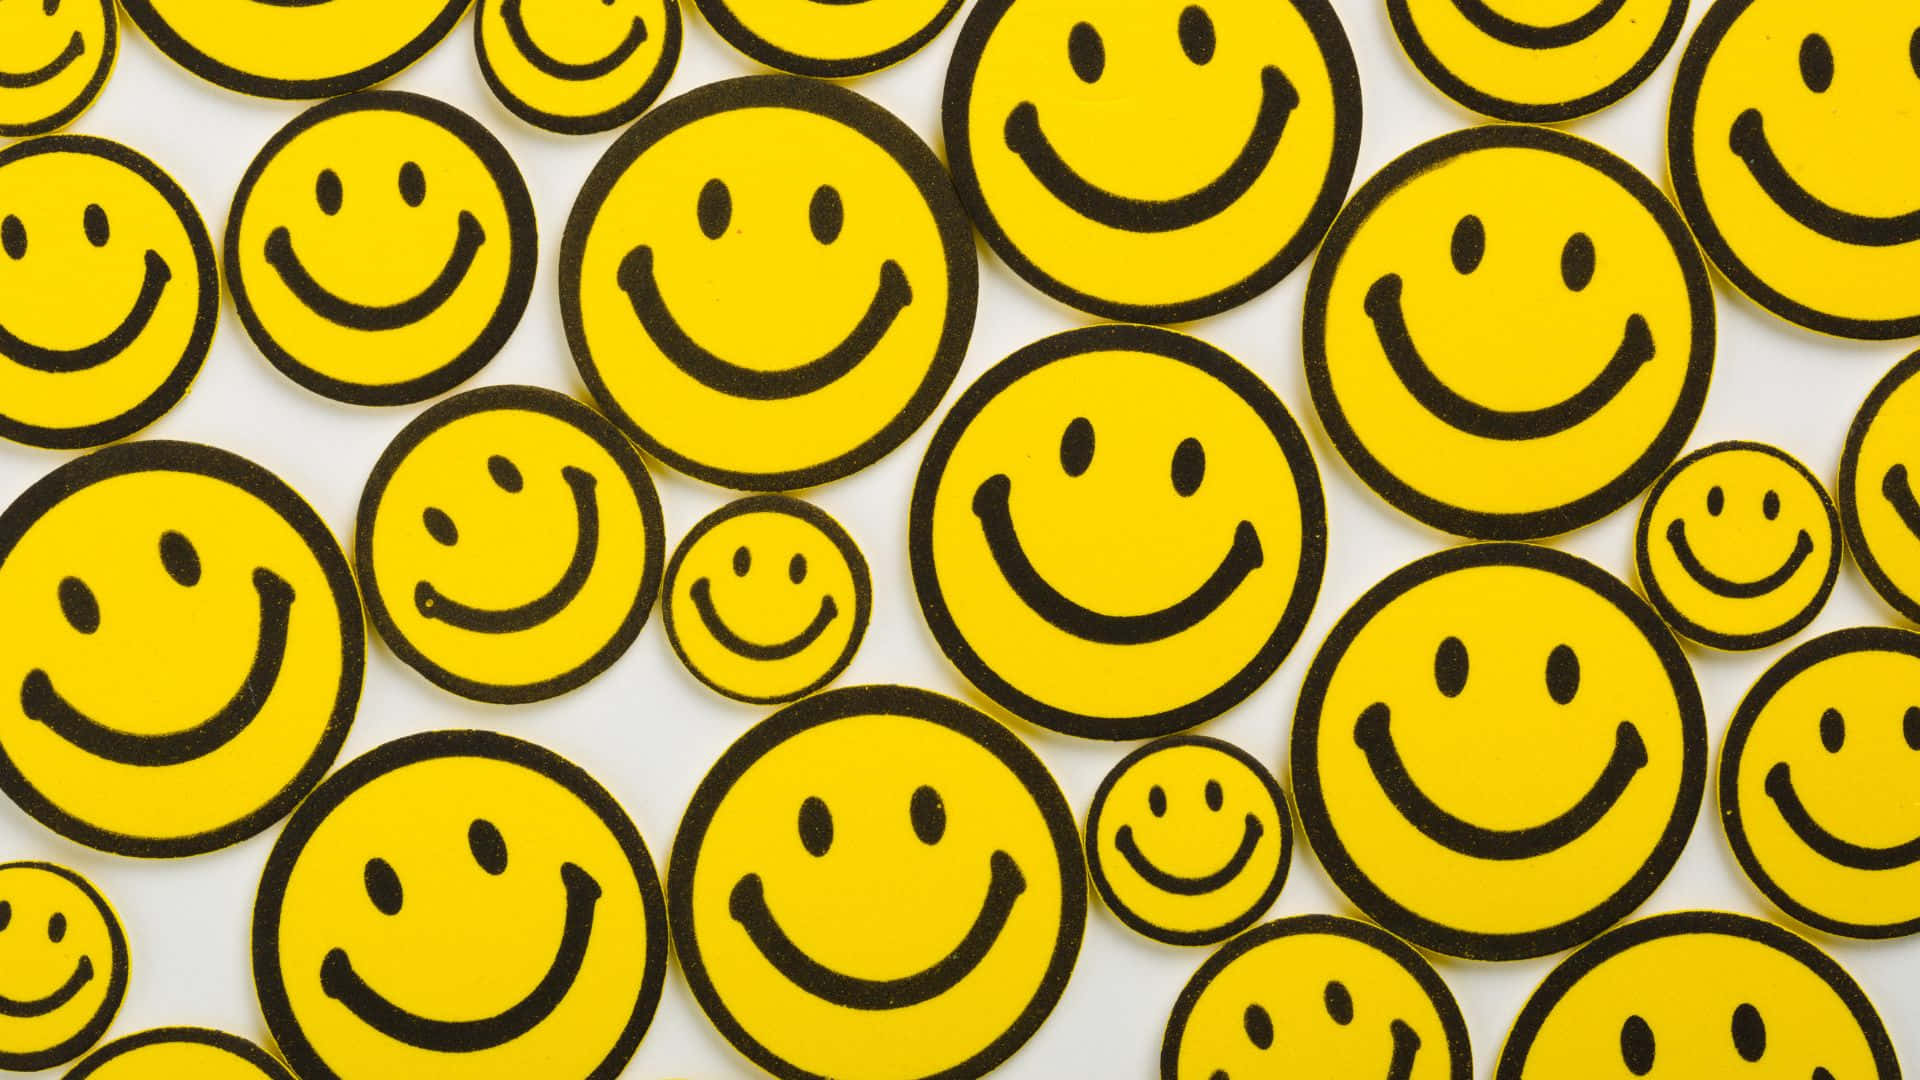 Gleeful Yellow Smiley Faces on Blue Background